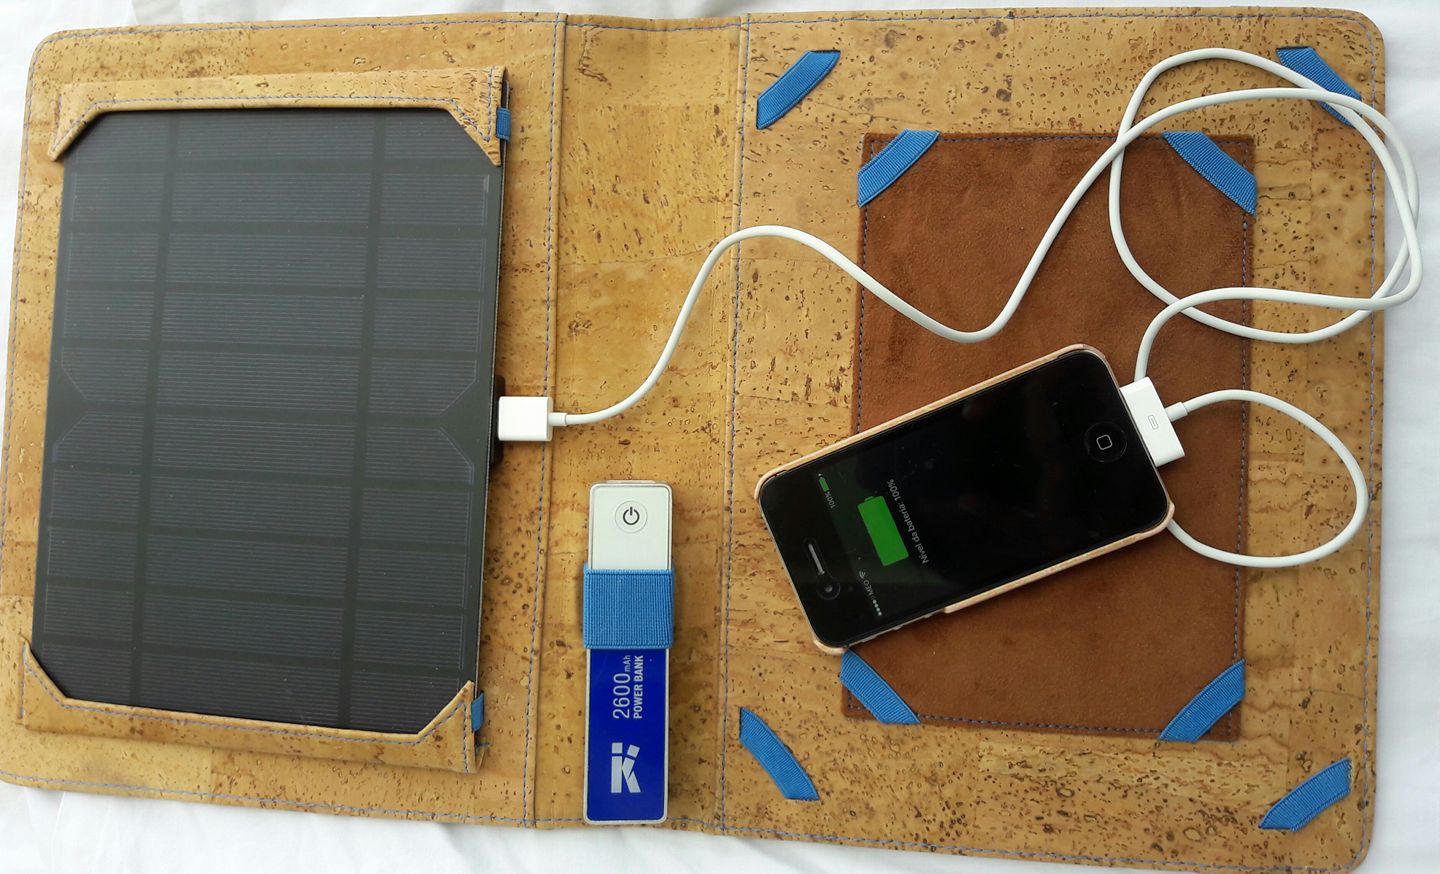 Cork Solar Panel Charger Case with Power Bank | HowCork - The Cork Marketplace